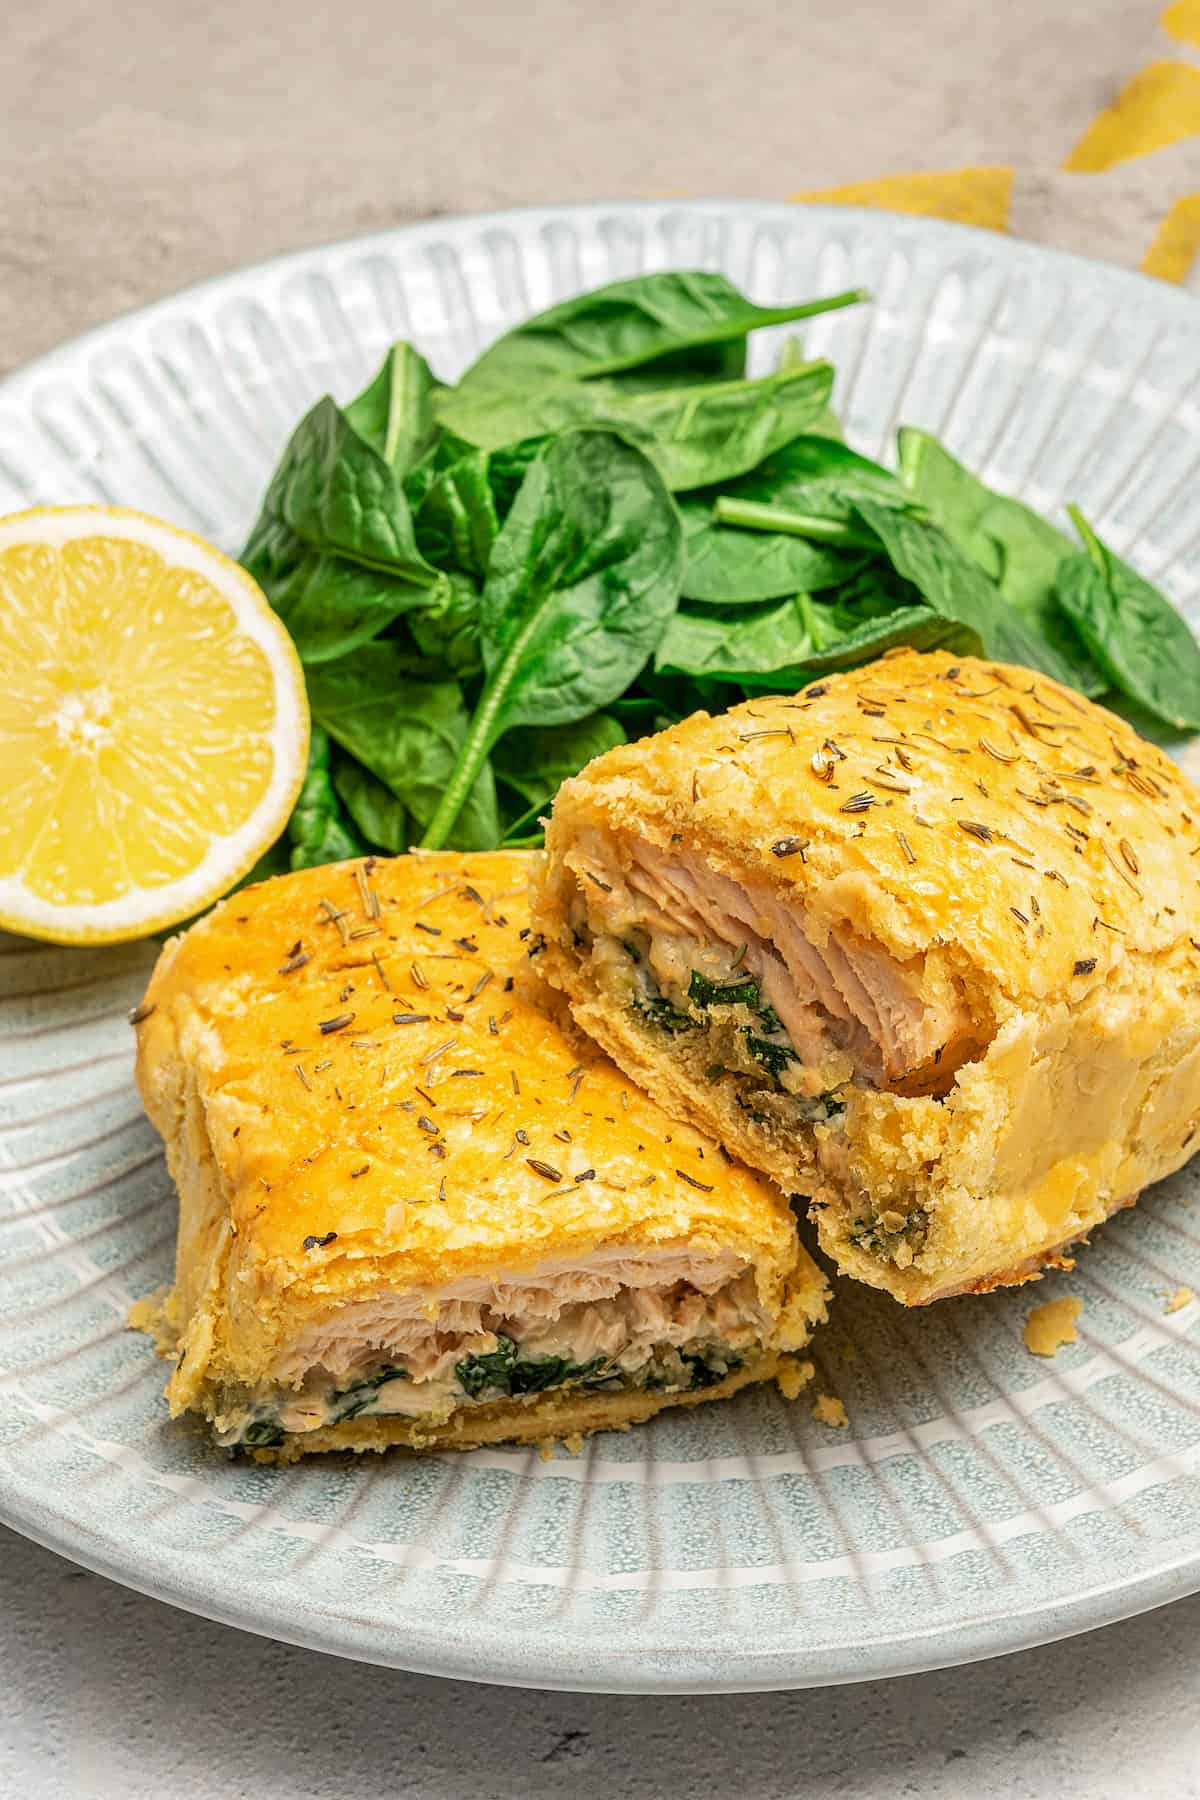 Gluten-free Salmon Wellington cut in half on a plate next to half a lemon and fresh spinach leaves and a fork.